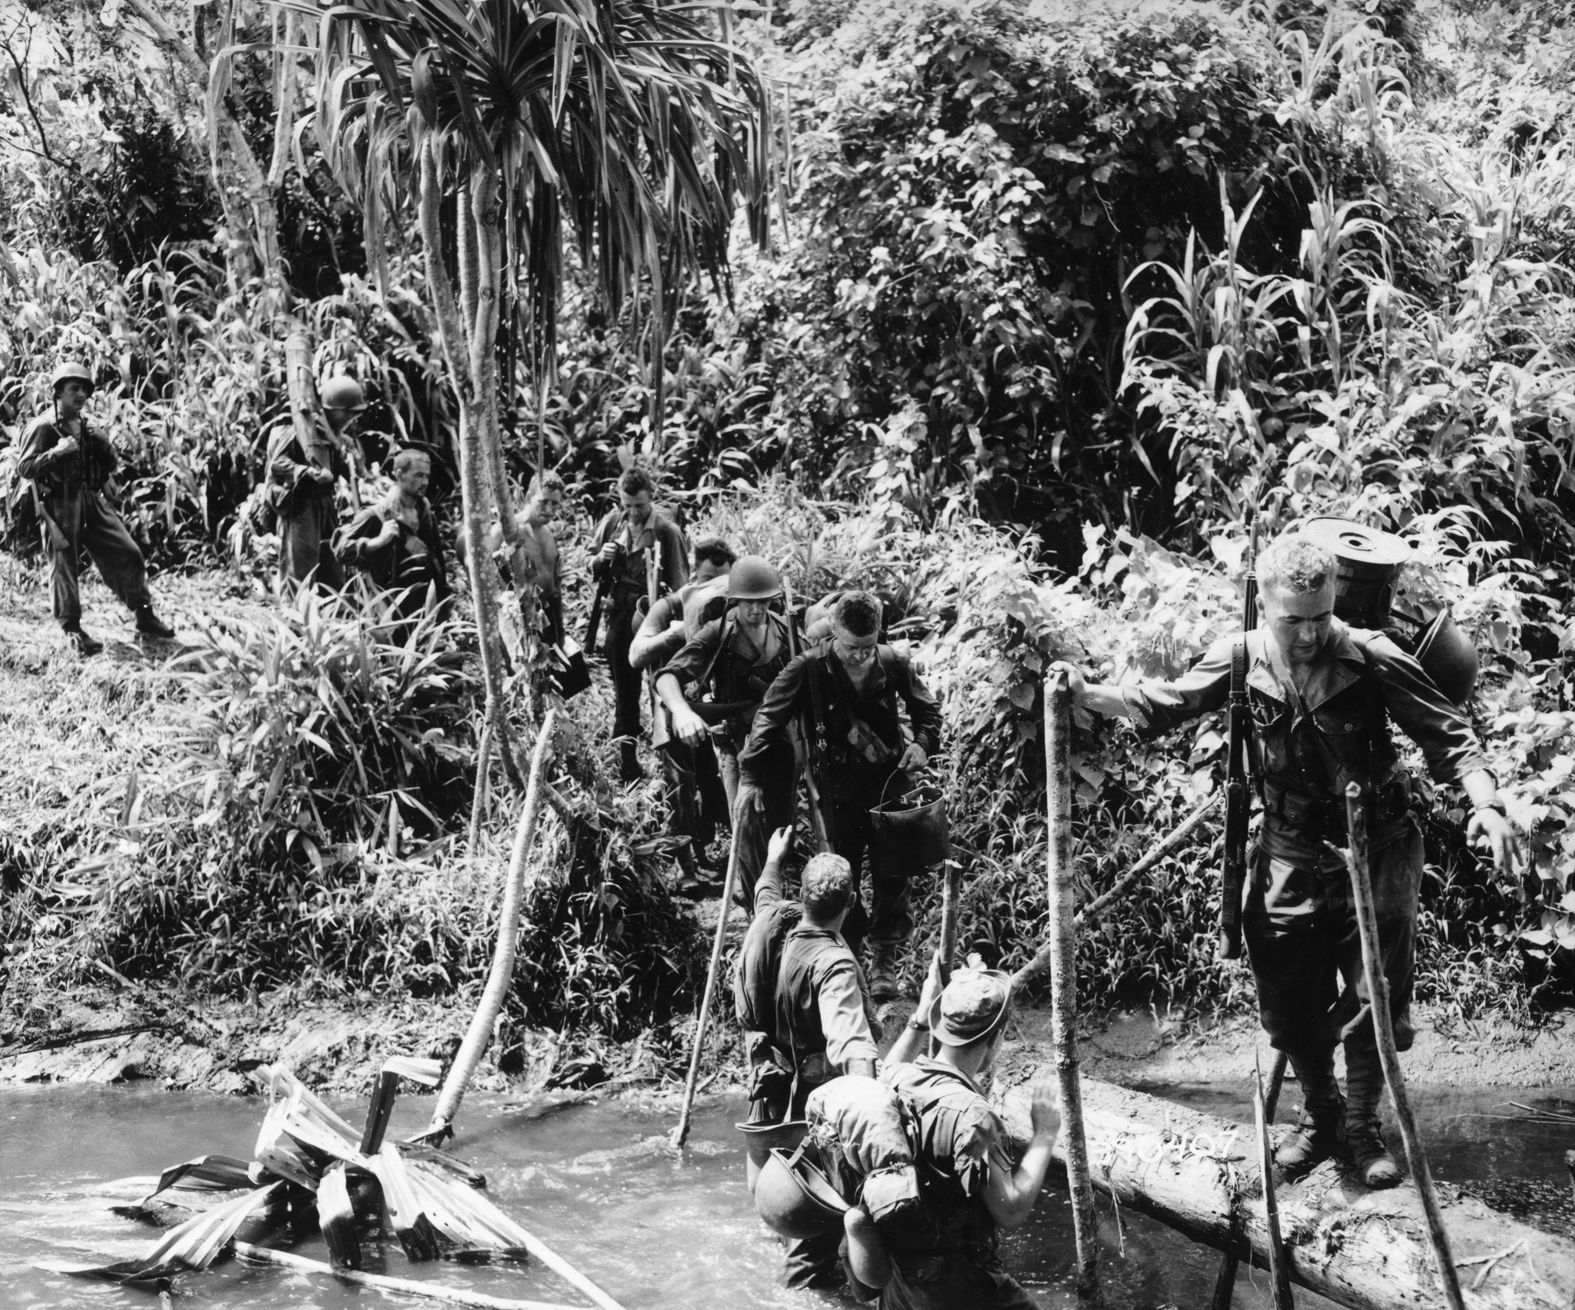 Men of Cannon Company, 128th Infantry Regiment, 32nd Division cross a branch of Kroro Creek in New Guinea on their way to Embogu, November 5, 1942.